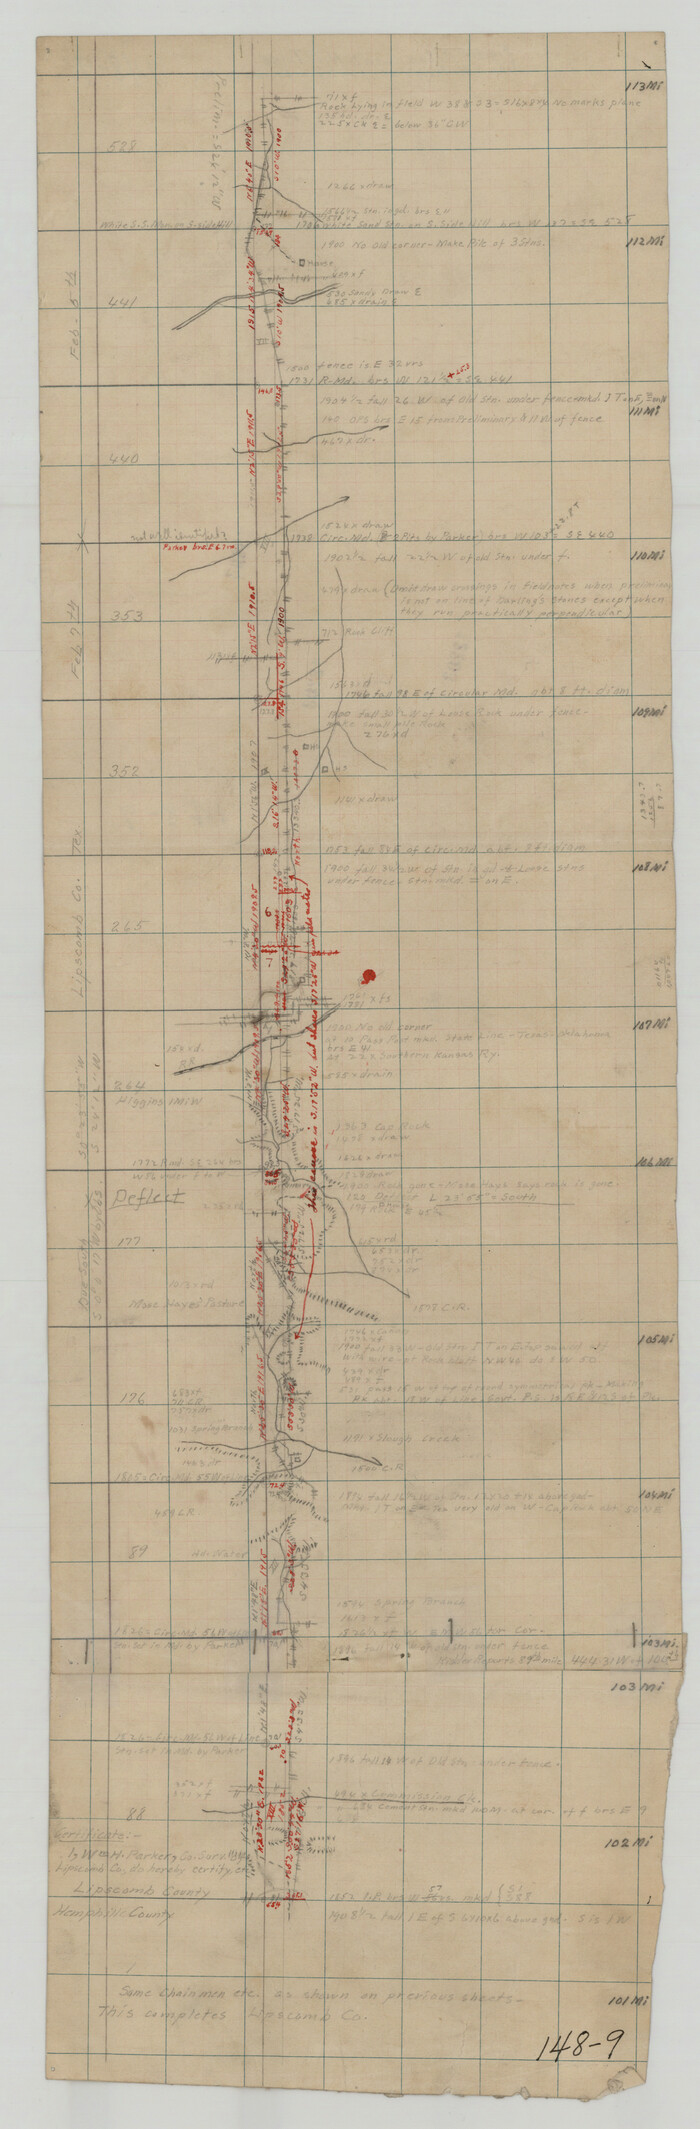 91306, [East Line of Lipscomb County], Twichell Survey Records